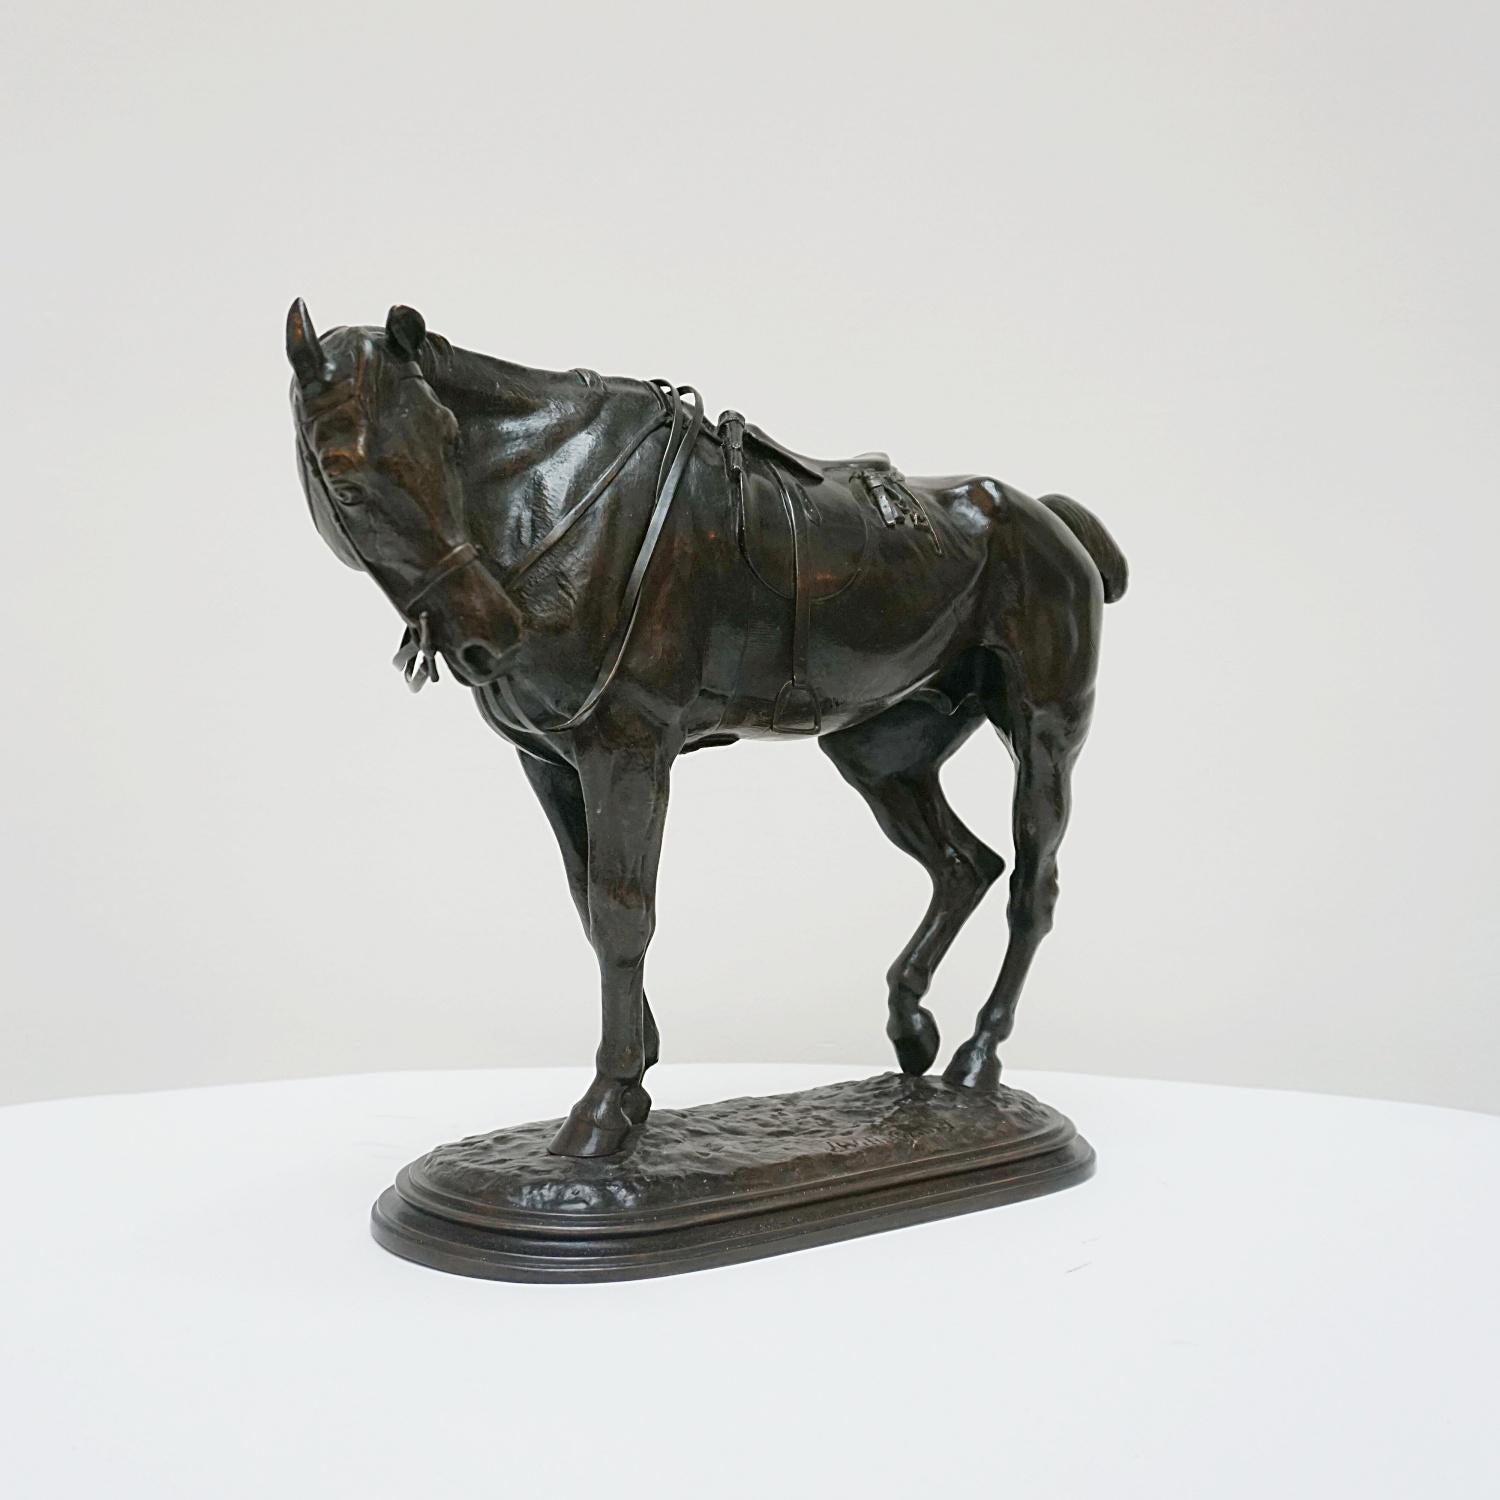 An excellent late 19th century English Animalier bronze study of a tried hunter in full tack taking a break with his neck turned and back leg rested. The bronze exhibits a wonderful rich brown patina, raised on a naturalistic oval base, signed J